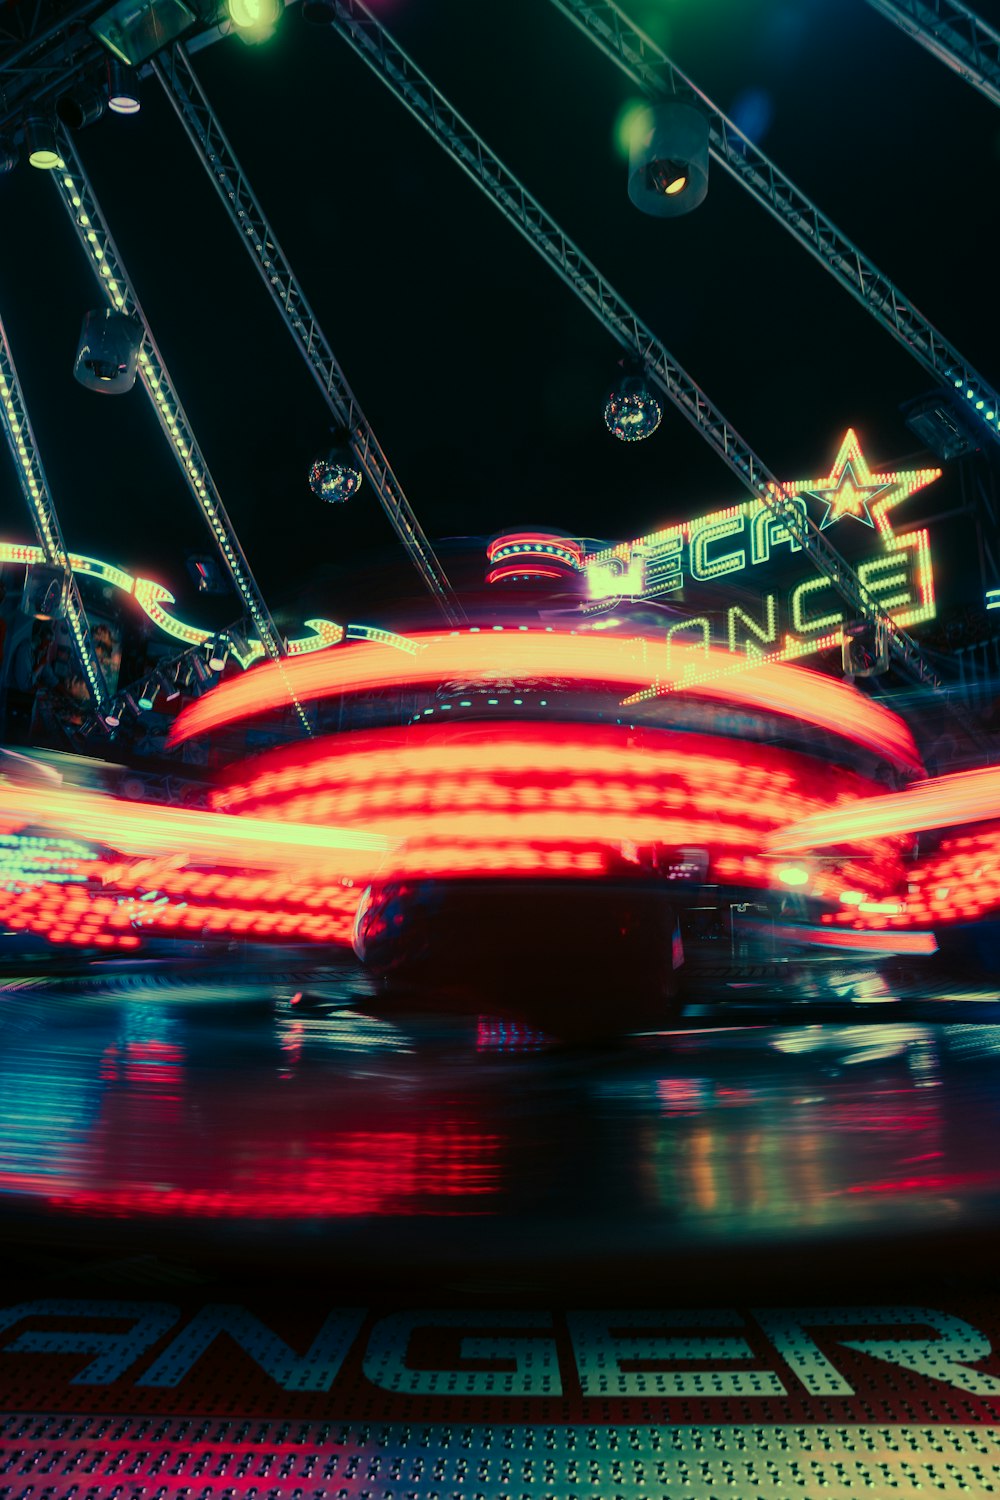 a carnival ride at night with lights on